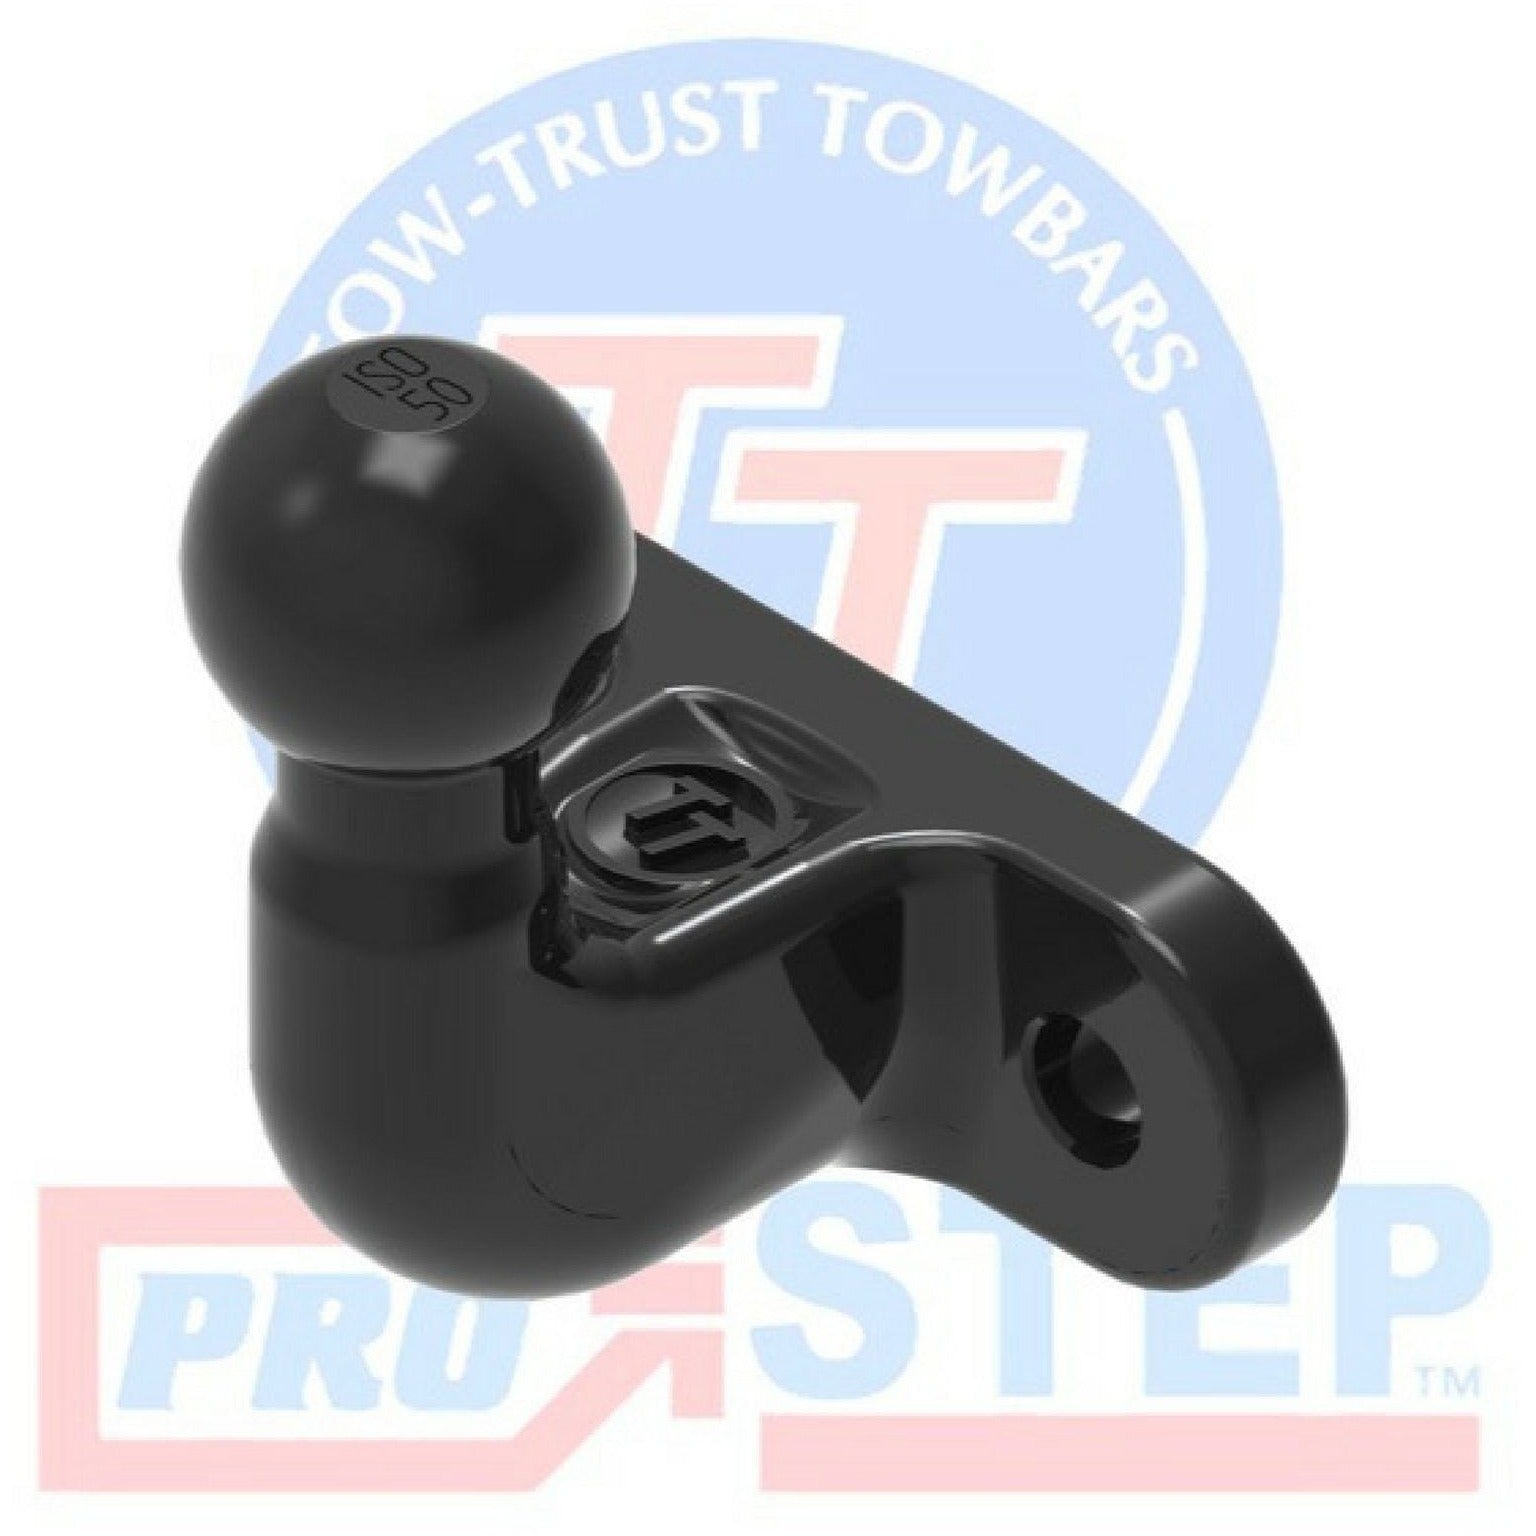 Tow Trust ALKO Chassis Towbar - Quality Caravan Awnings